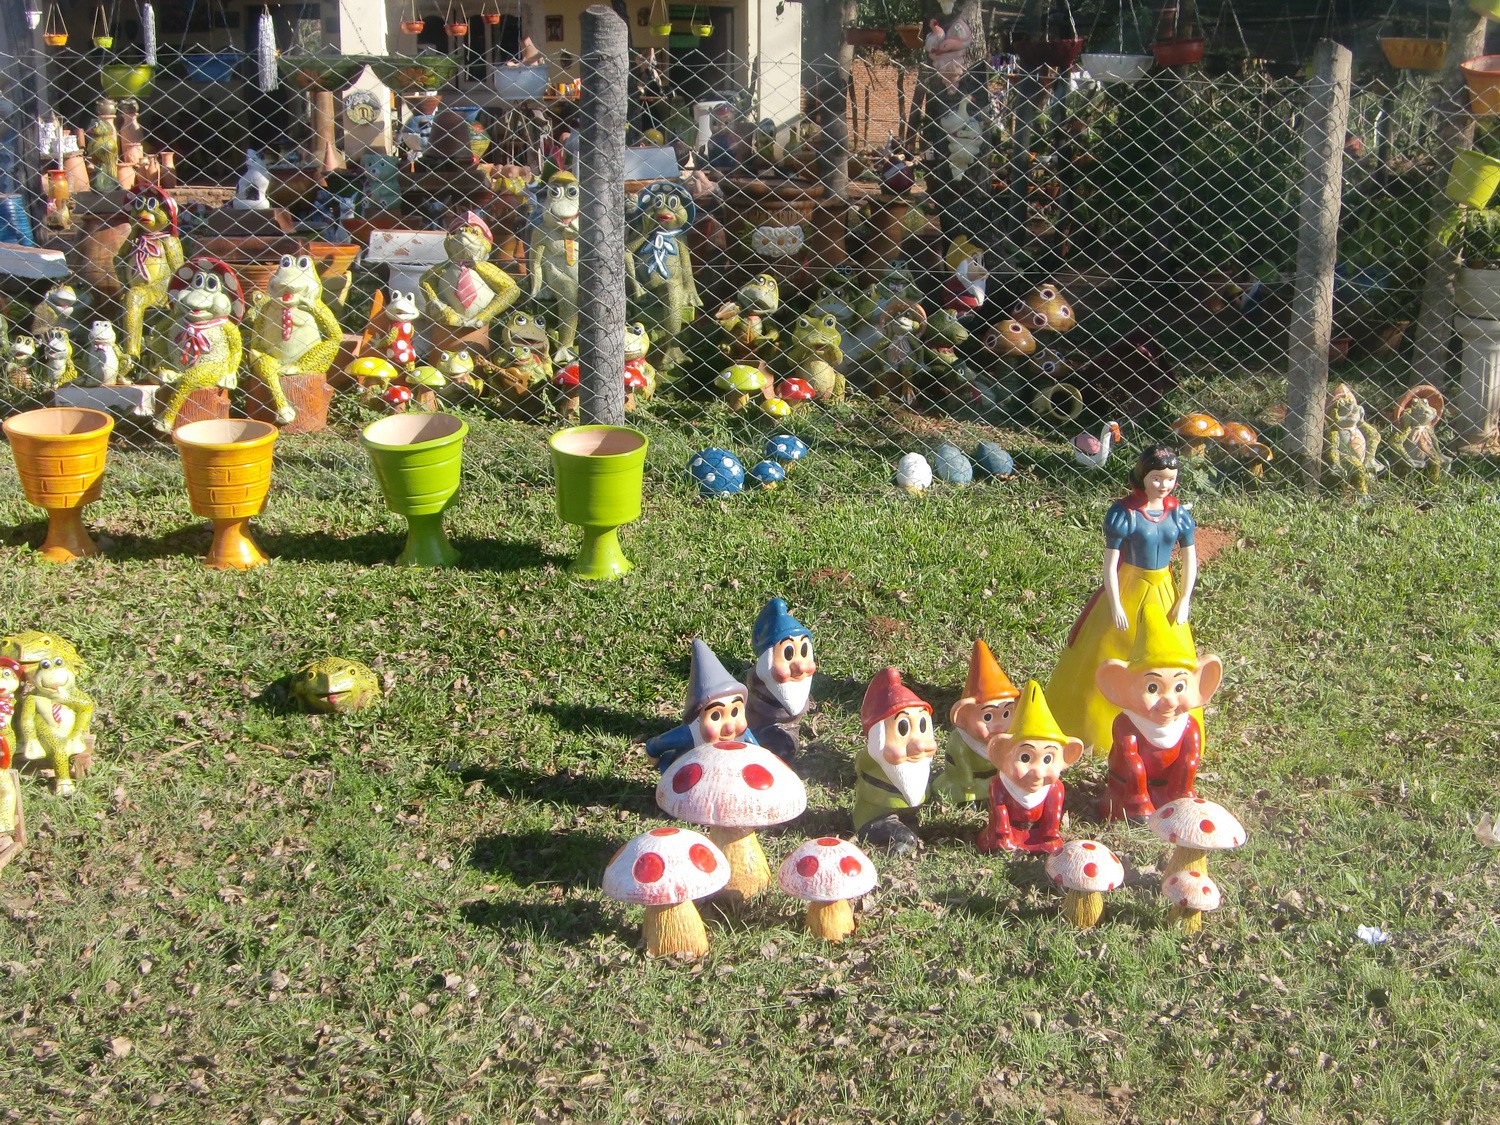 Garden gnomes in Paraguay